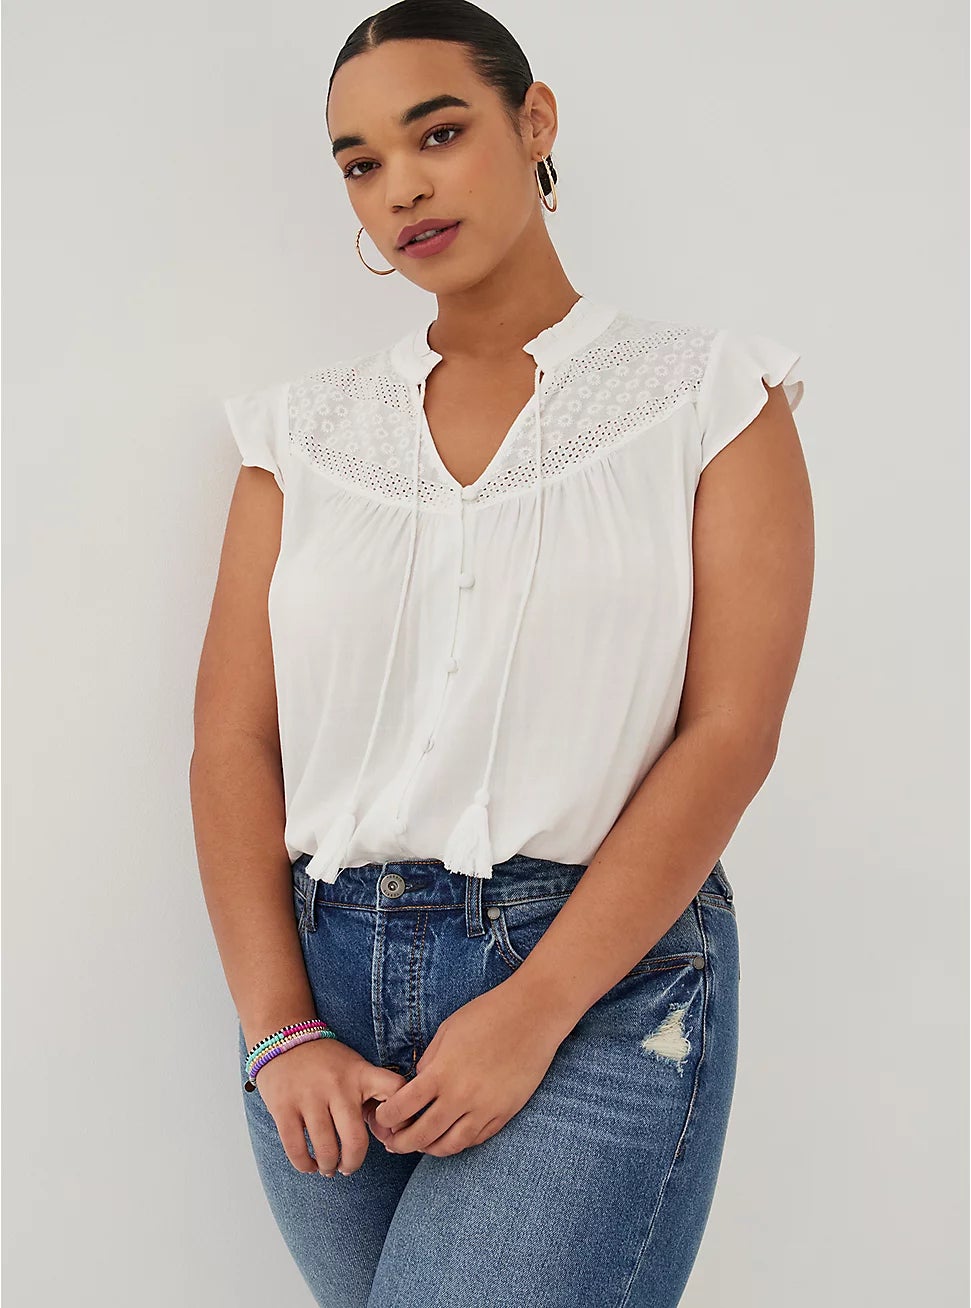 model wearing the white peasant blouse with blue jeans